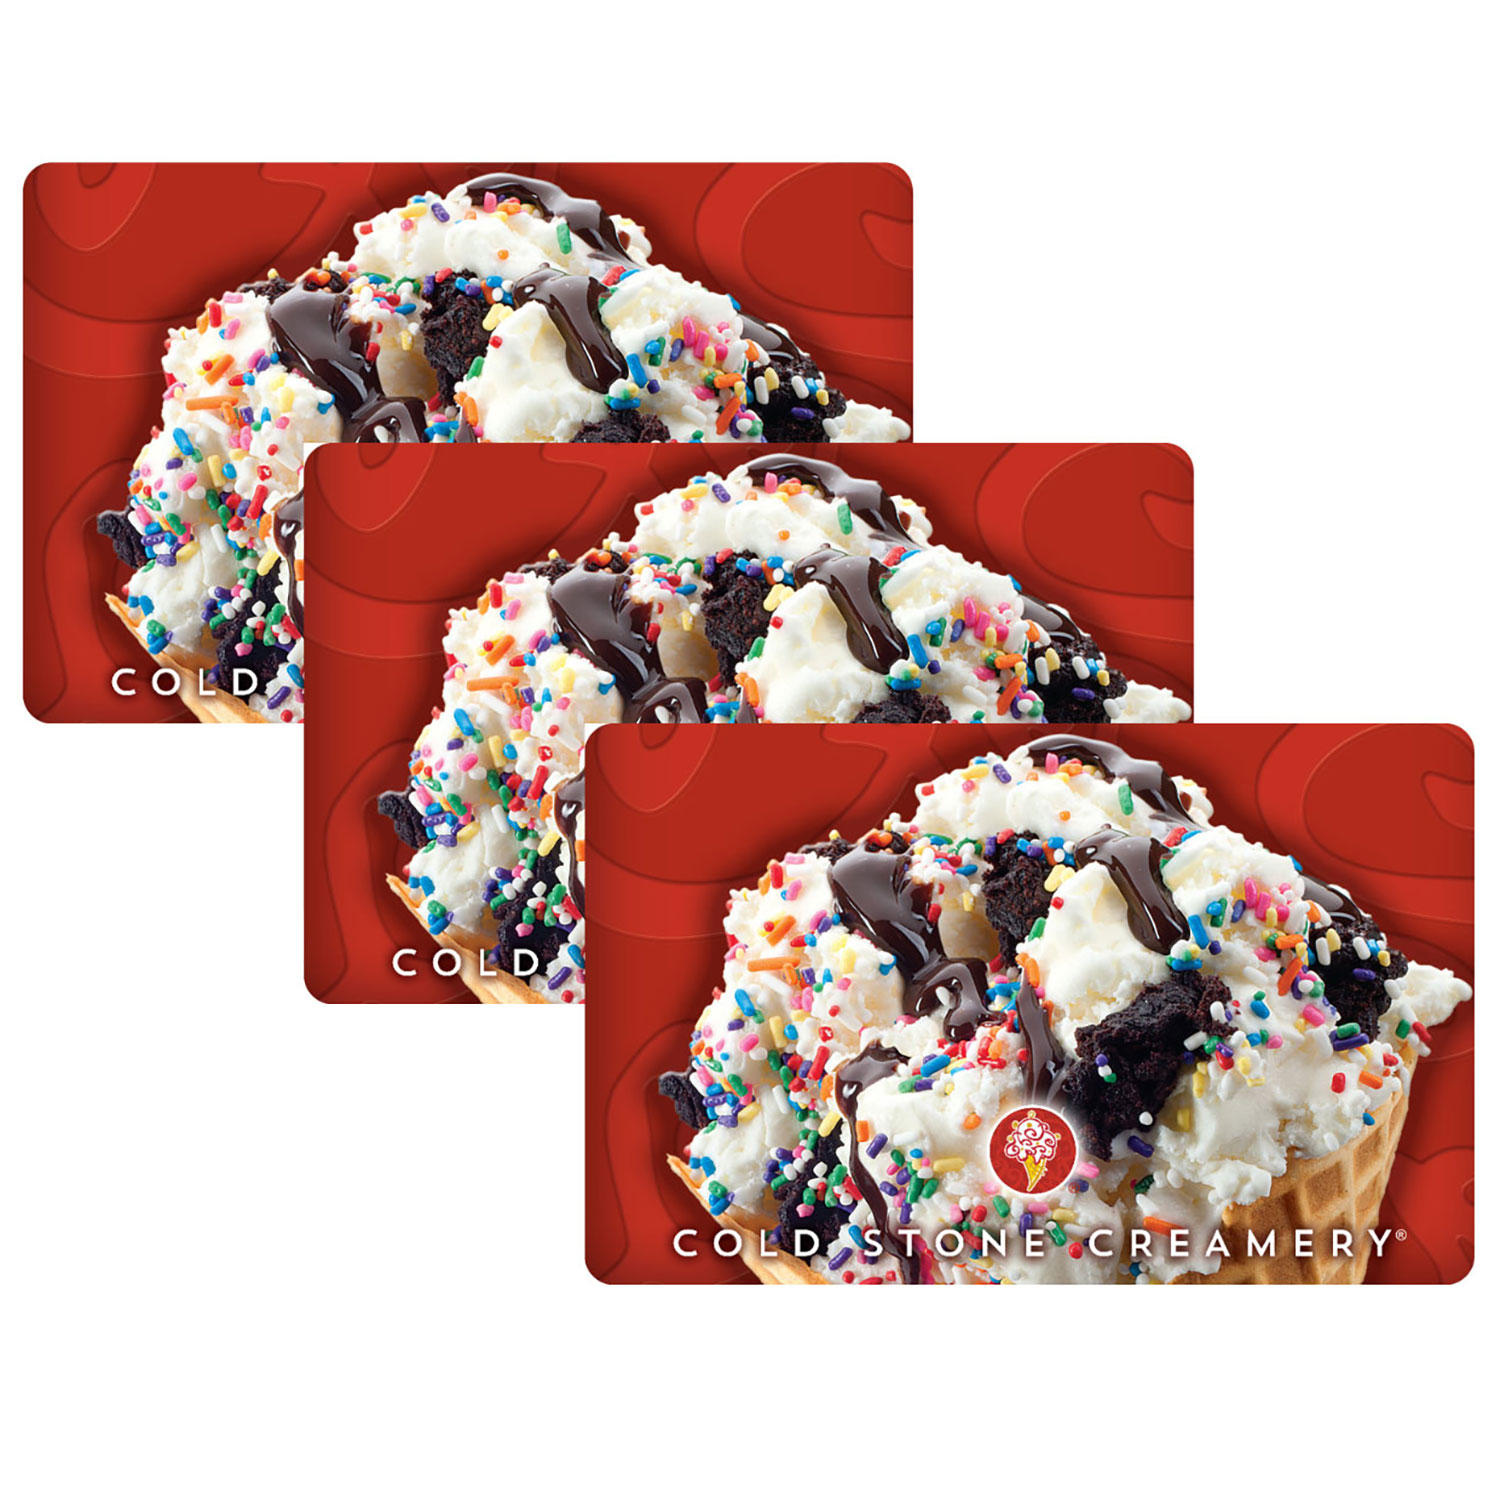 $30 (3 x $10) Cold Stone Creamery Gift Cards